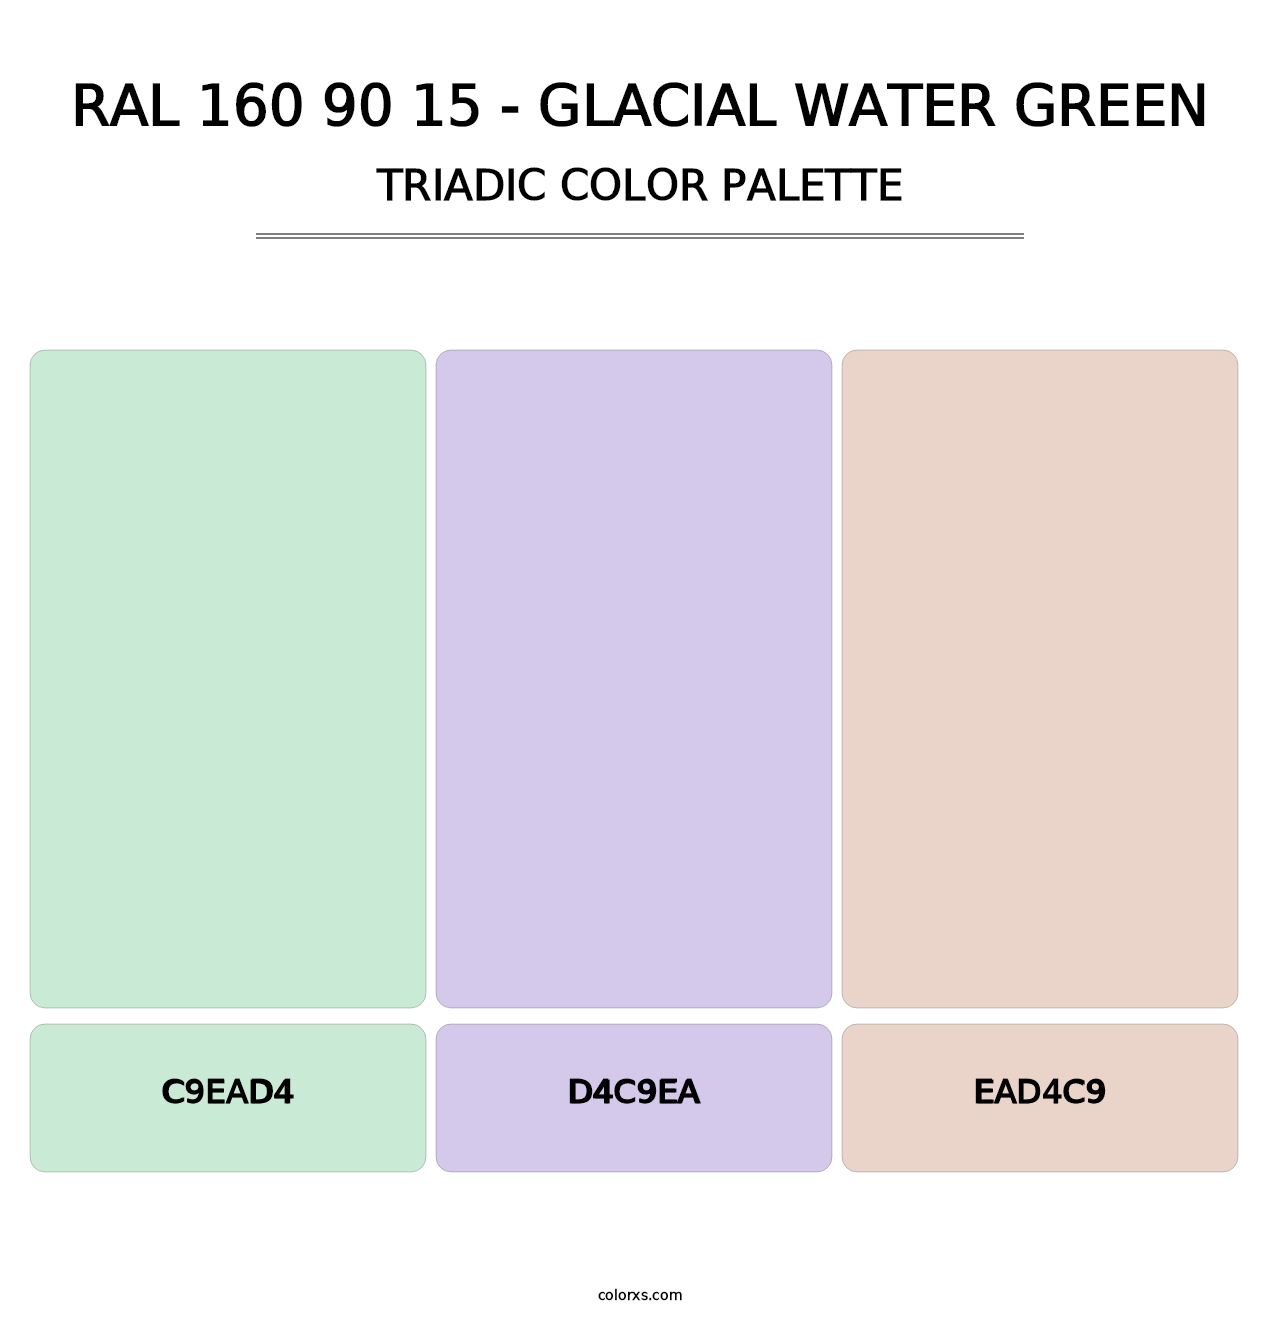 RAL 160 90 15 - Glacial Water Green - Triadic Color Palette